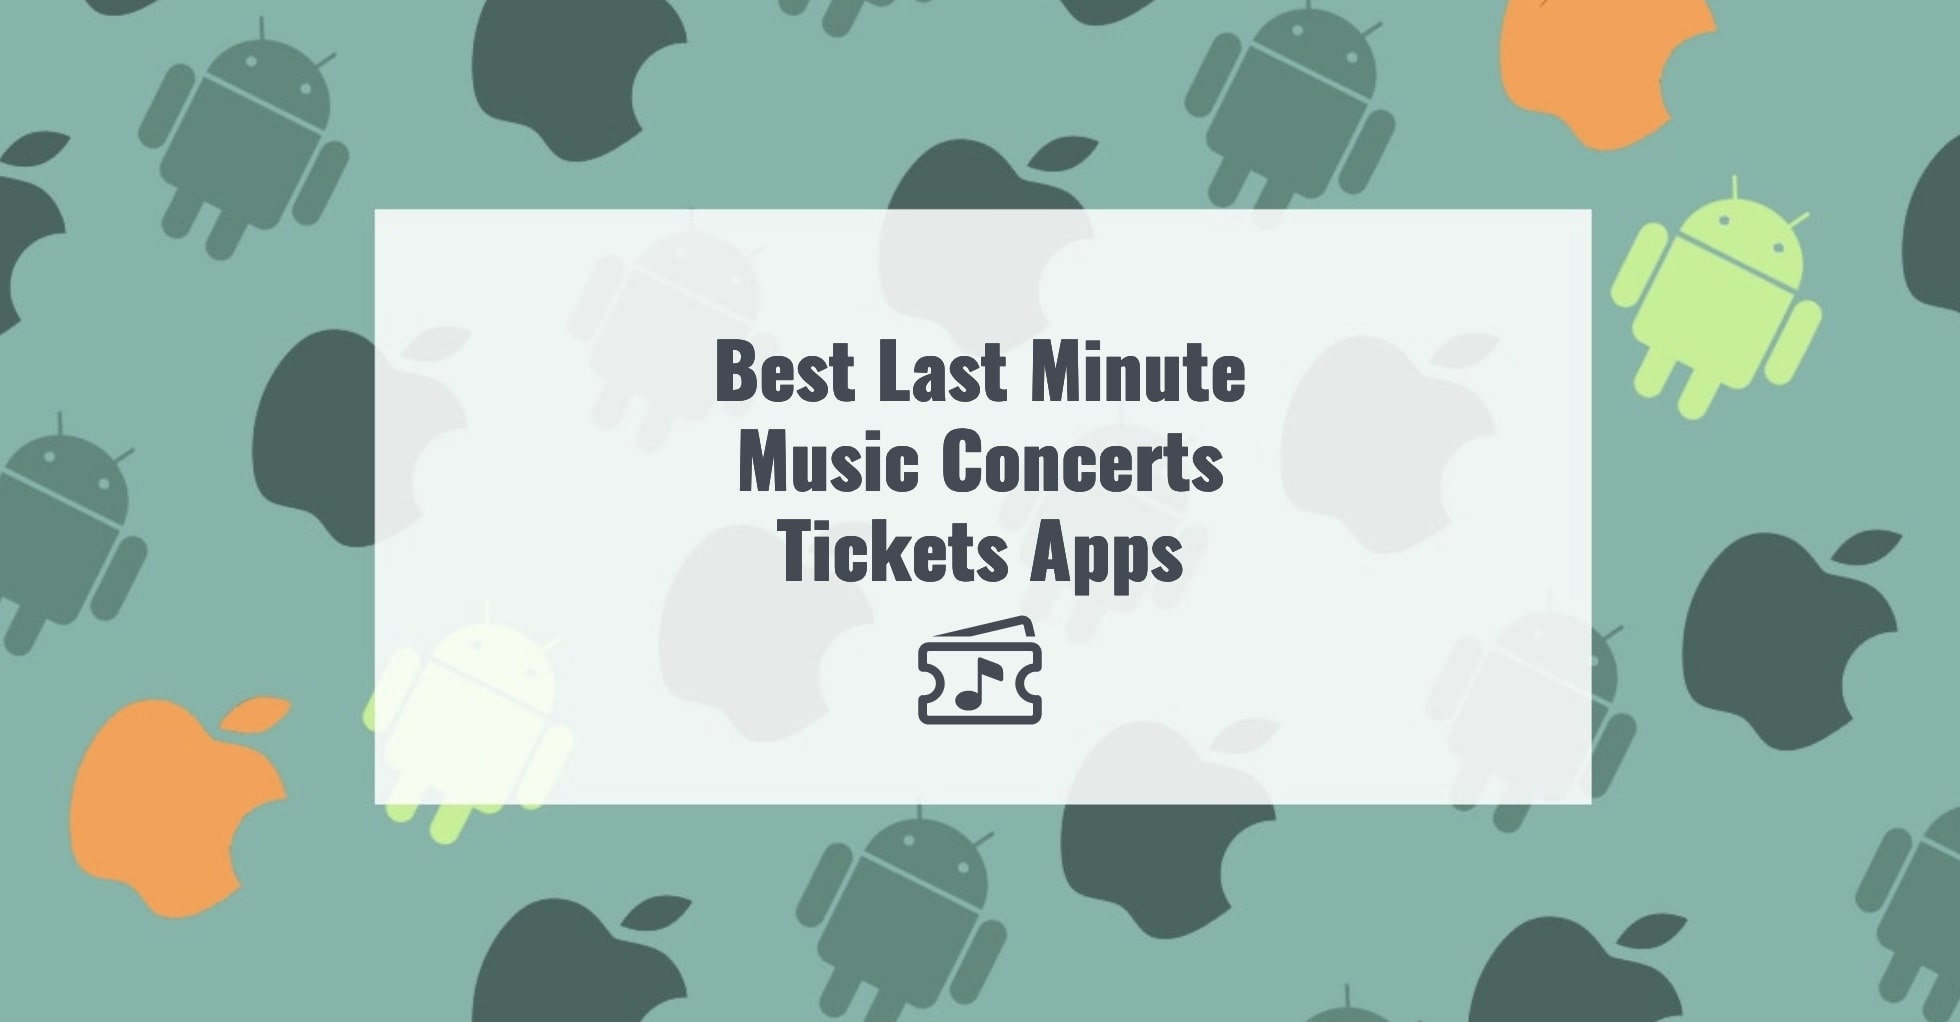 Best Last Minute Music Concerts Tickets Apps